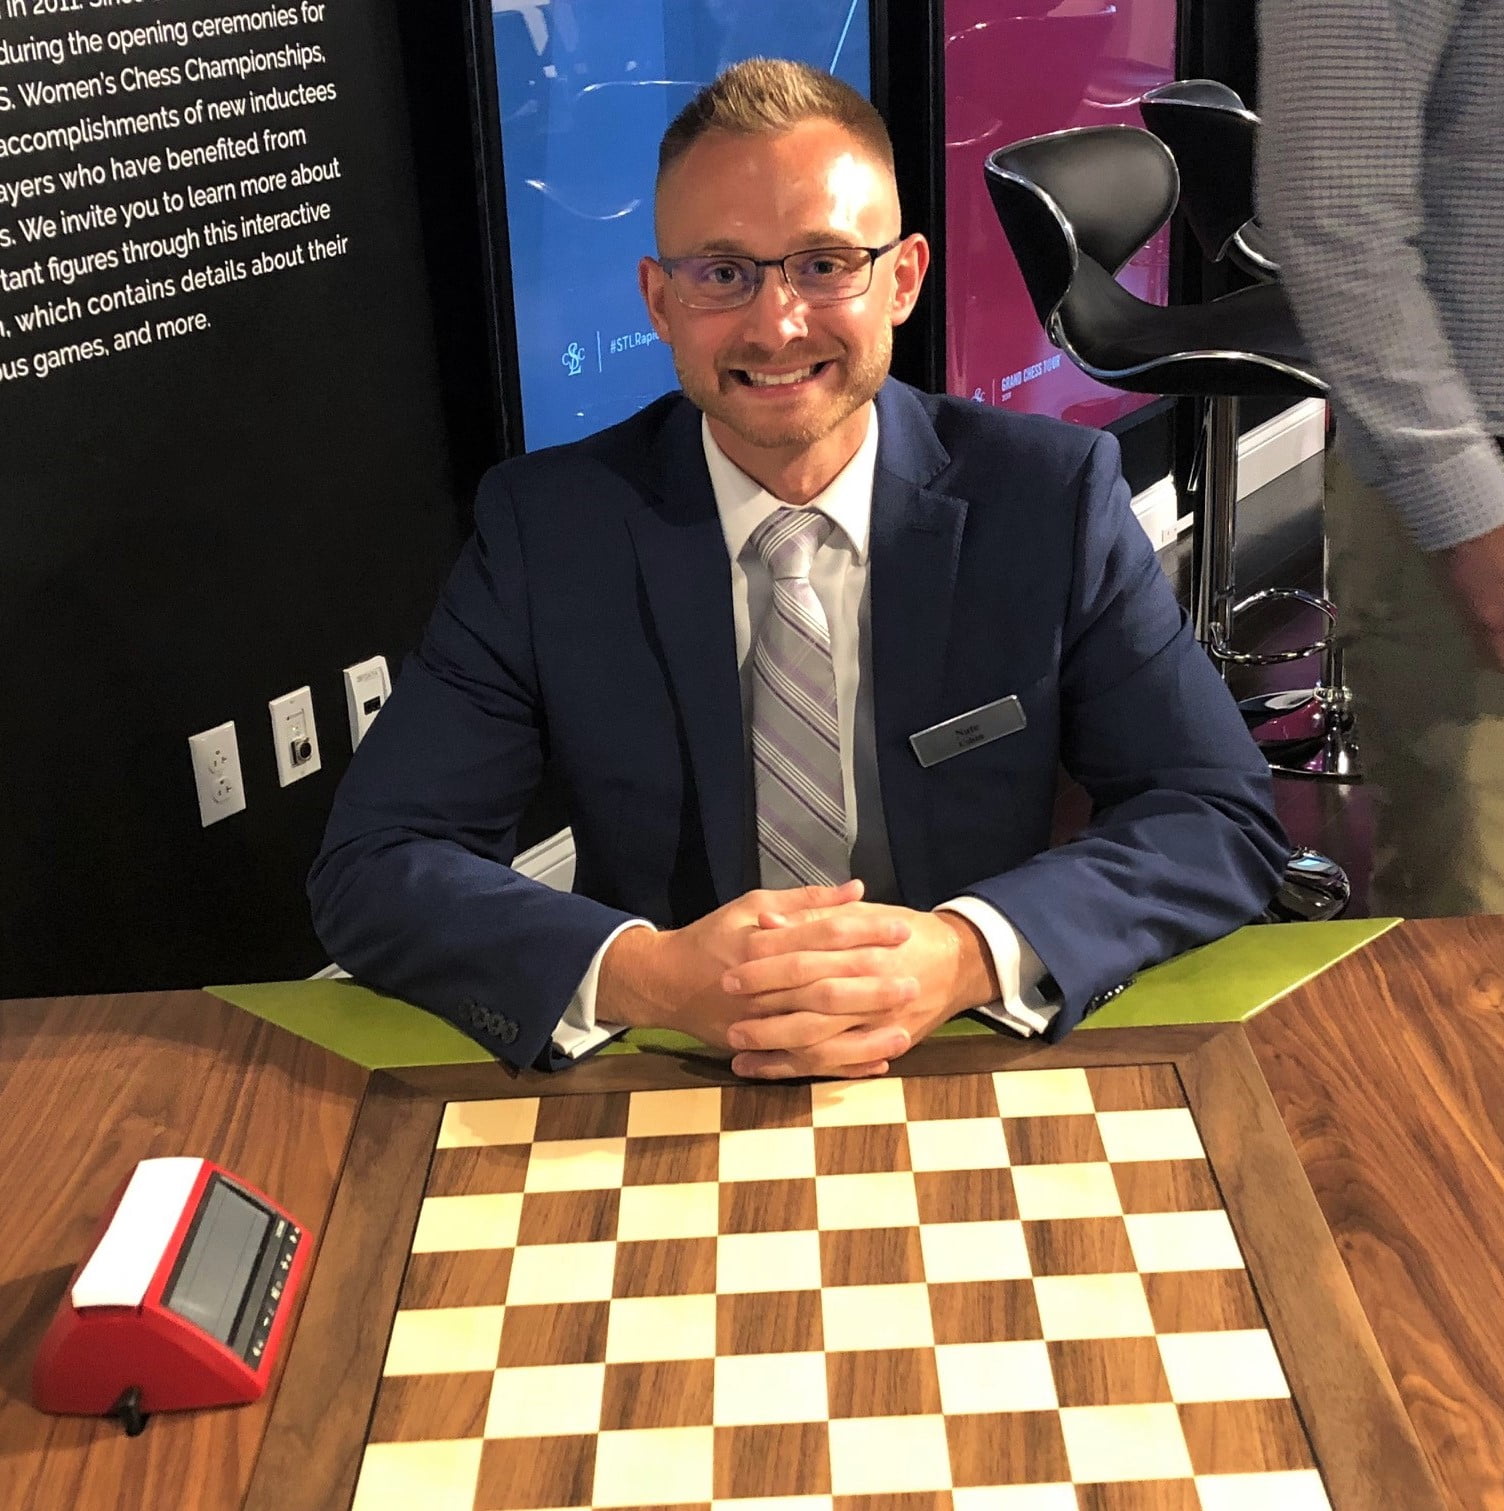 Cohen Architectural Woodworking’s Nate Cohen Creates New Chess Tables for Grand Chess Tour ...